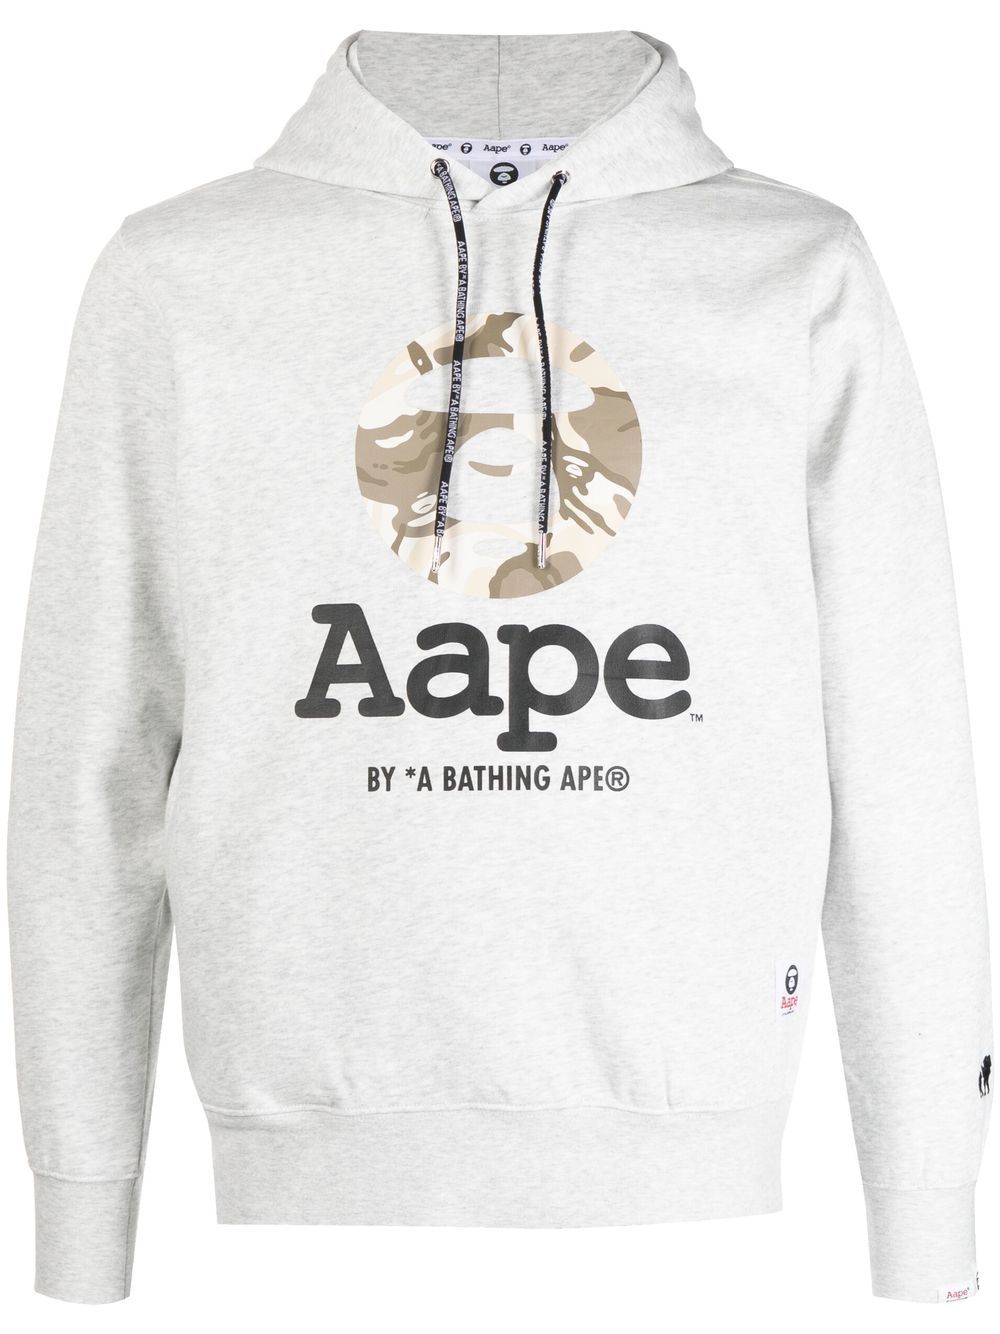 AAPE BY *A BATHING APE® logo print pullover hoodie - Grey von AAPE BY *A BATHING APE®